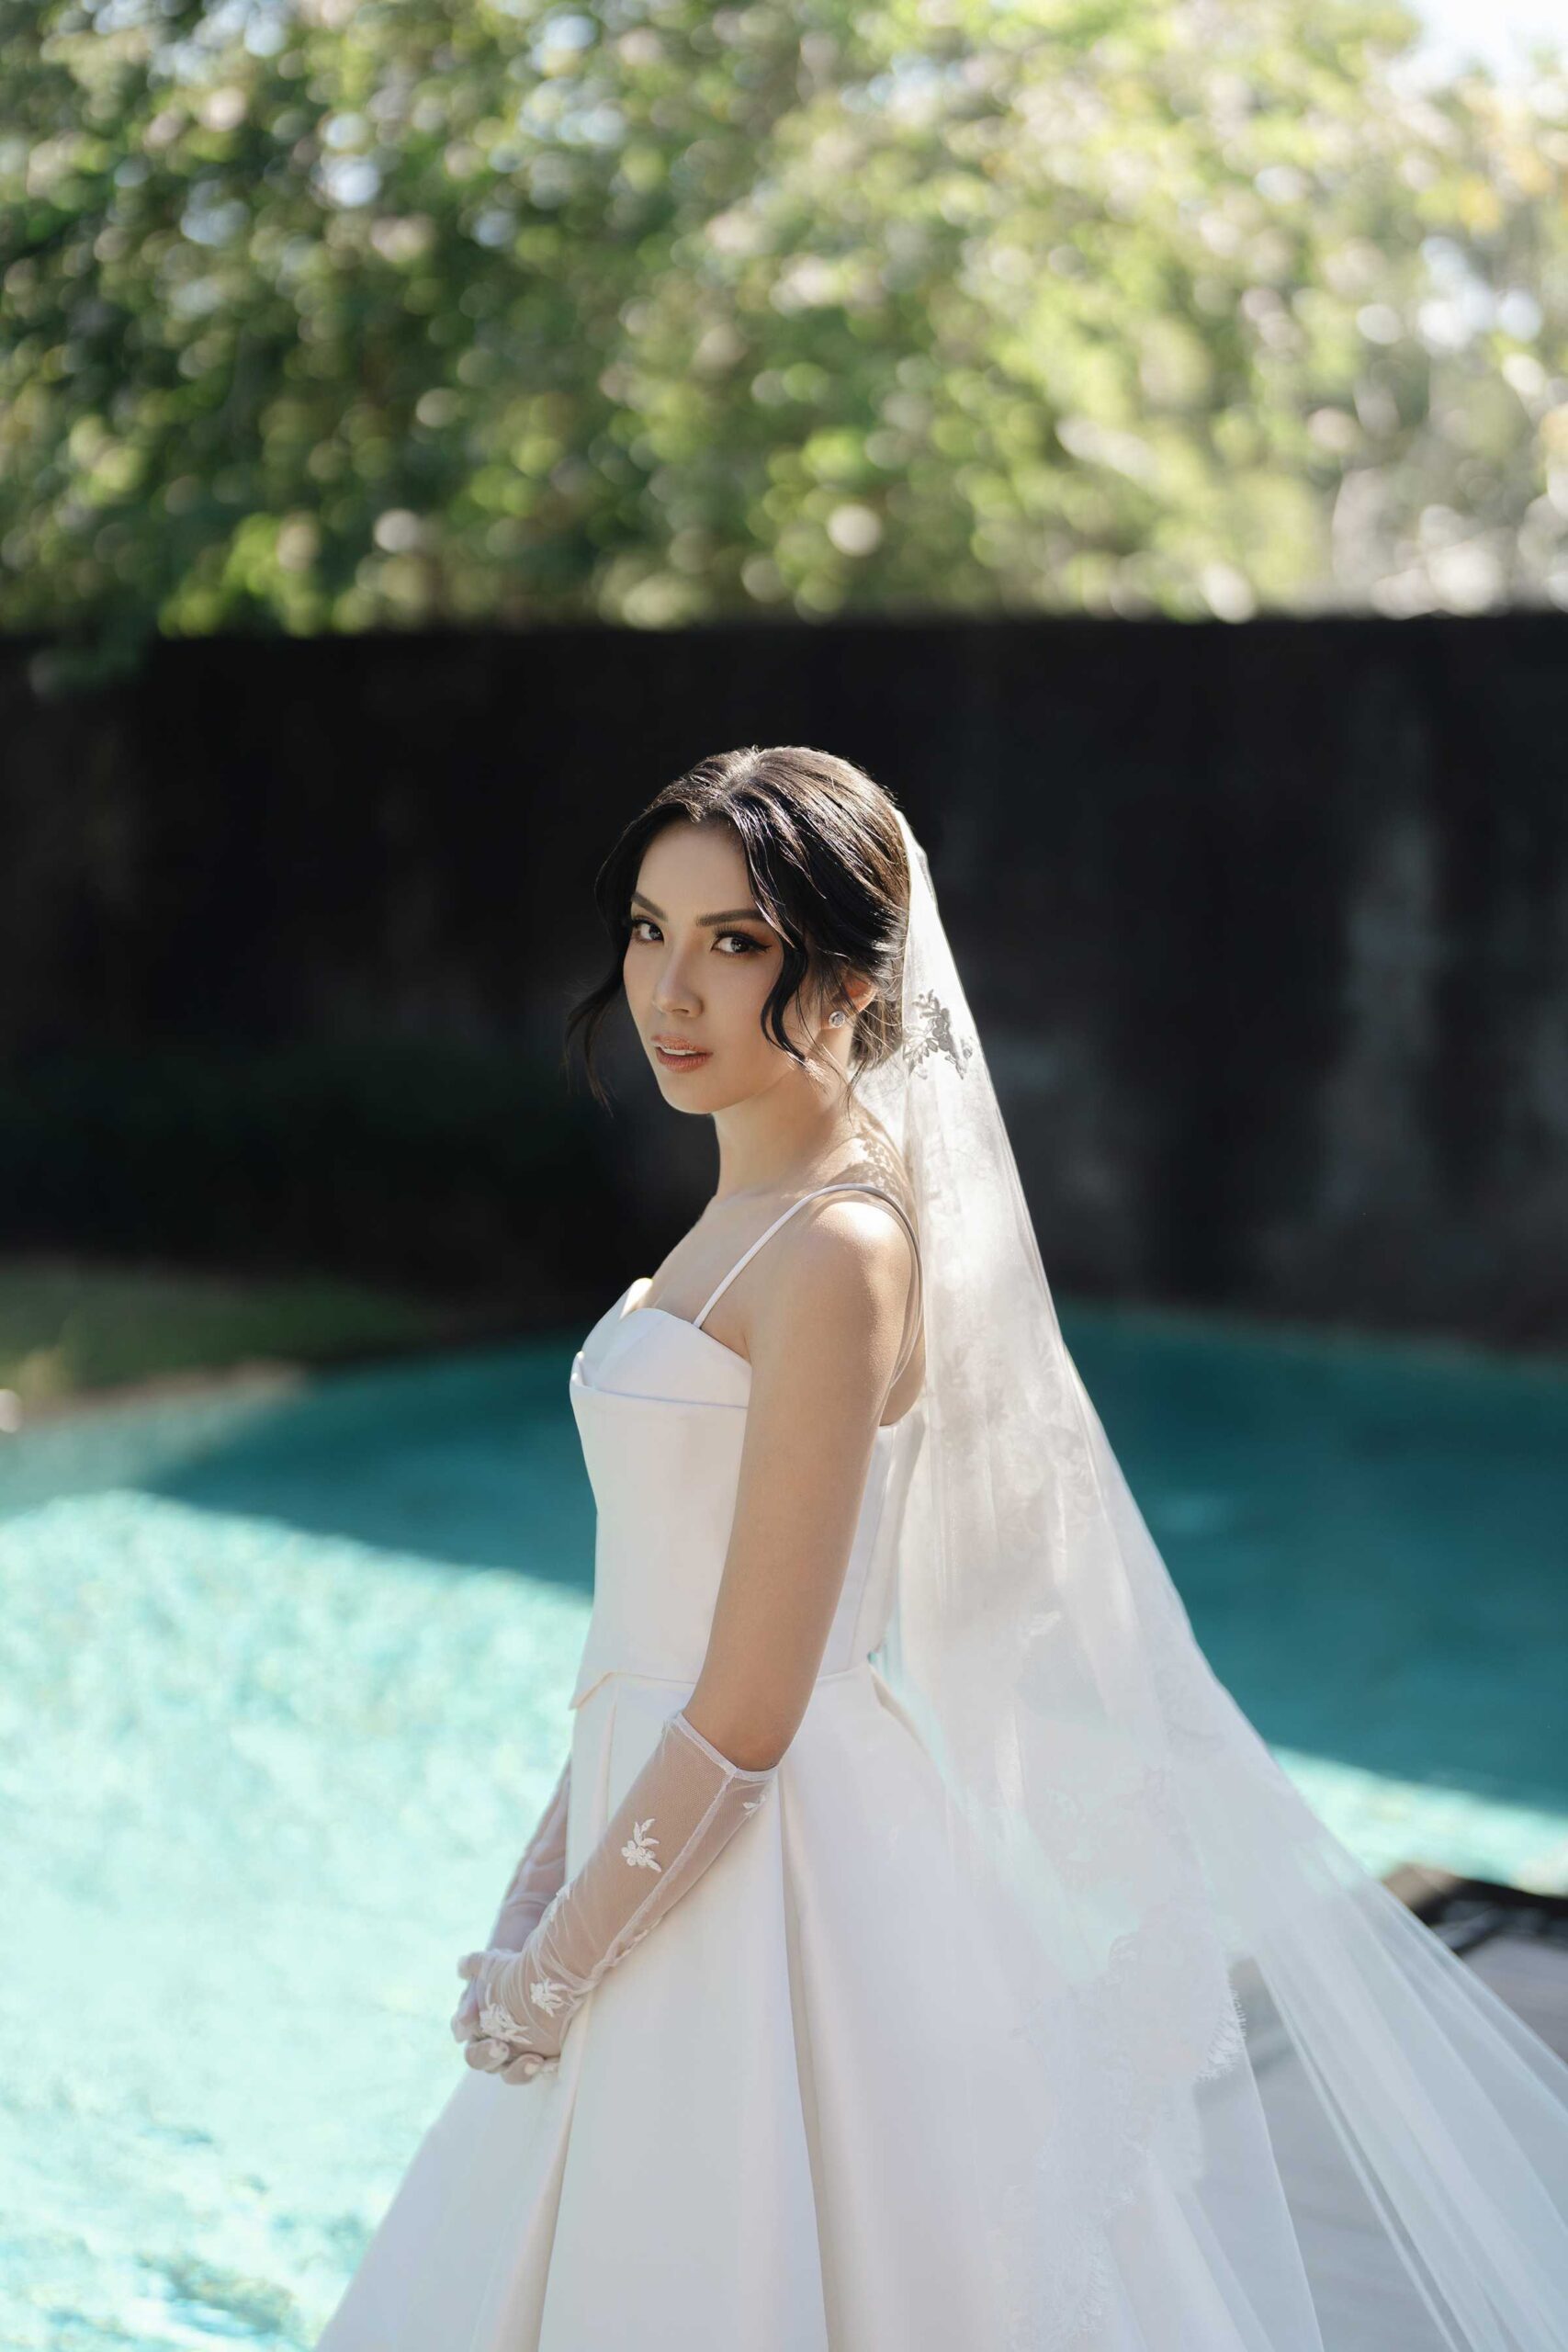 Anj in her Vera Wang bridal gown